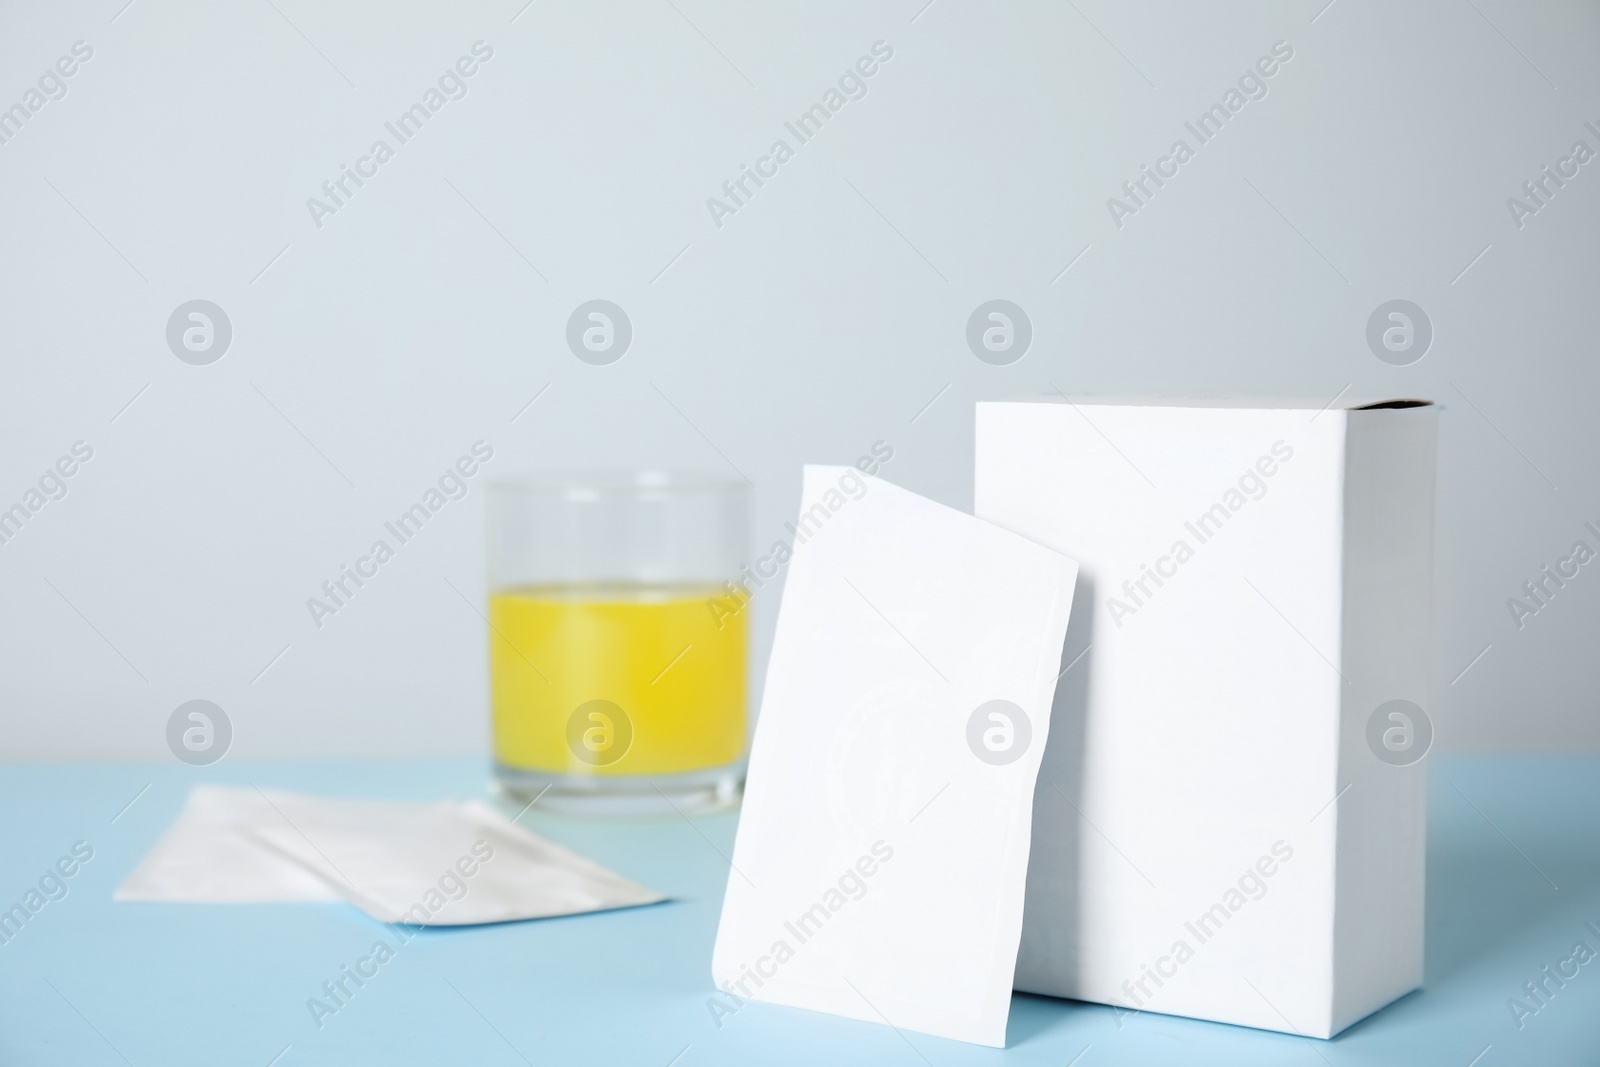 Photo of Medicine sachet and box on turquoise table. Space for text